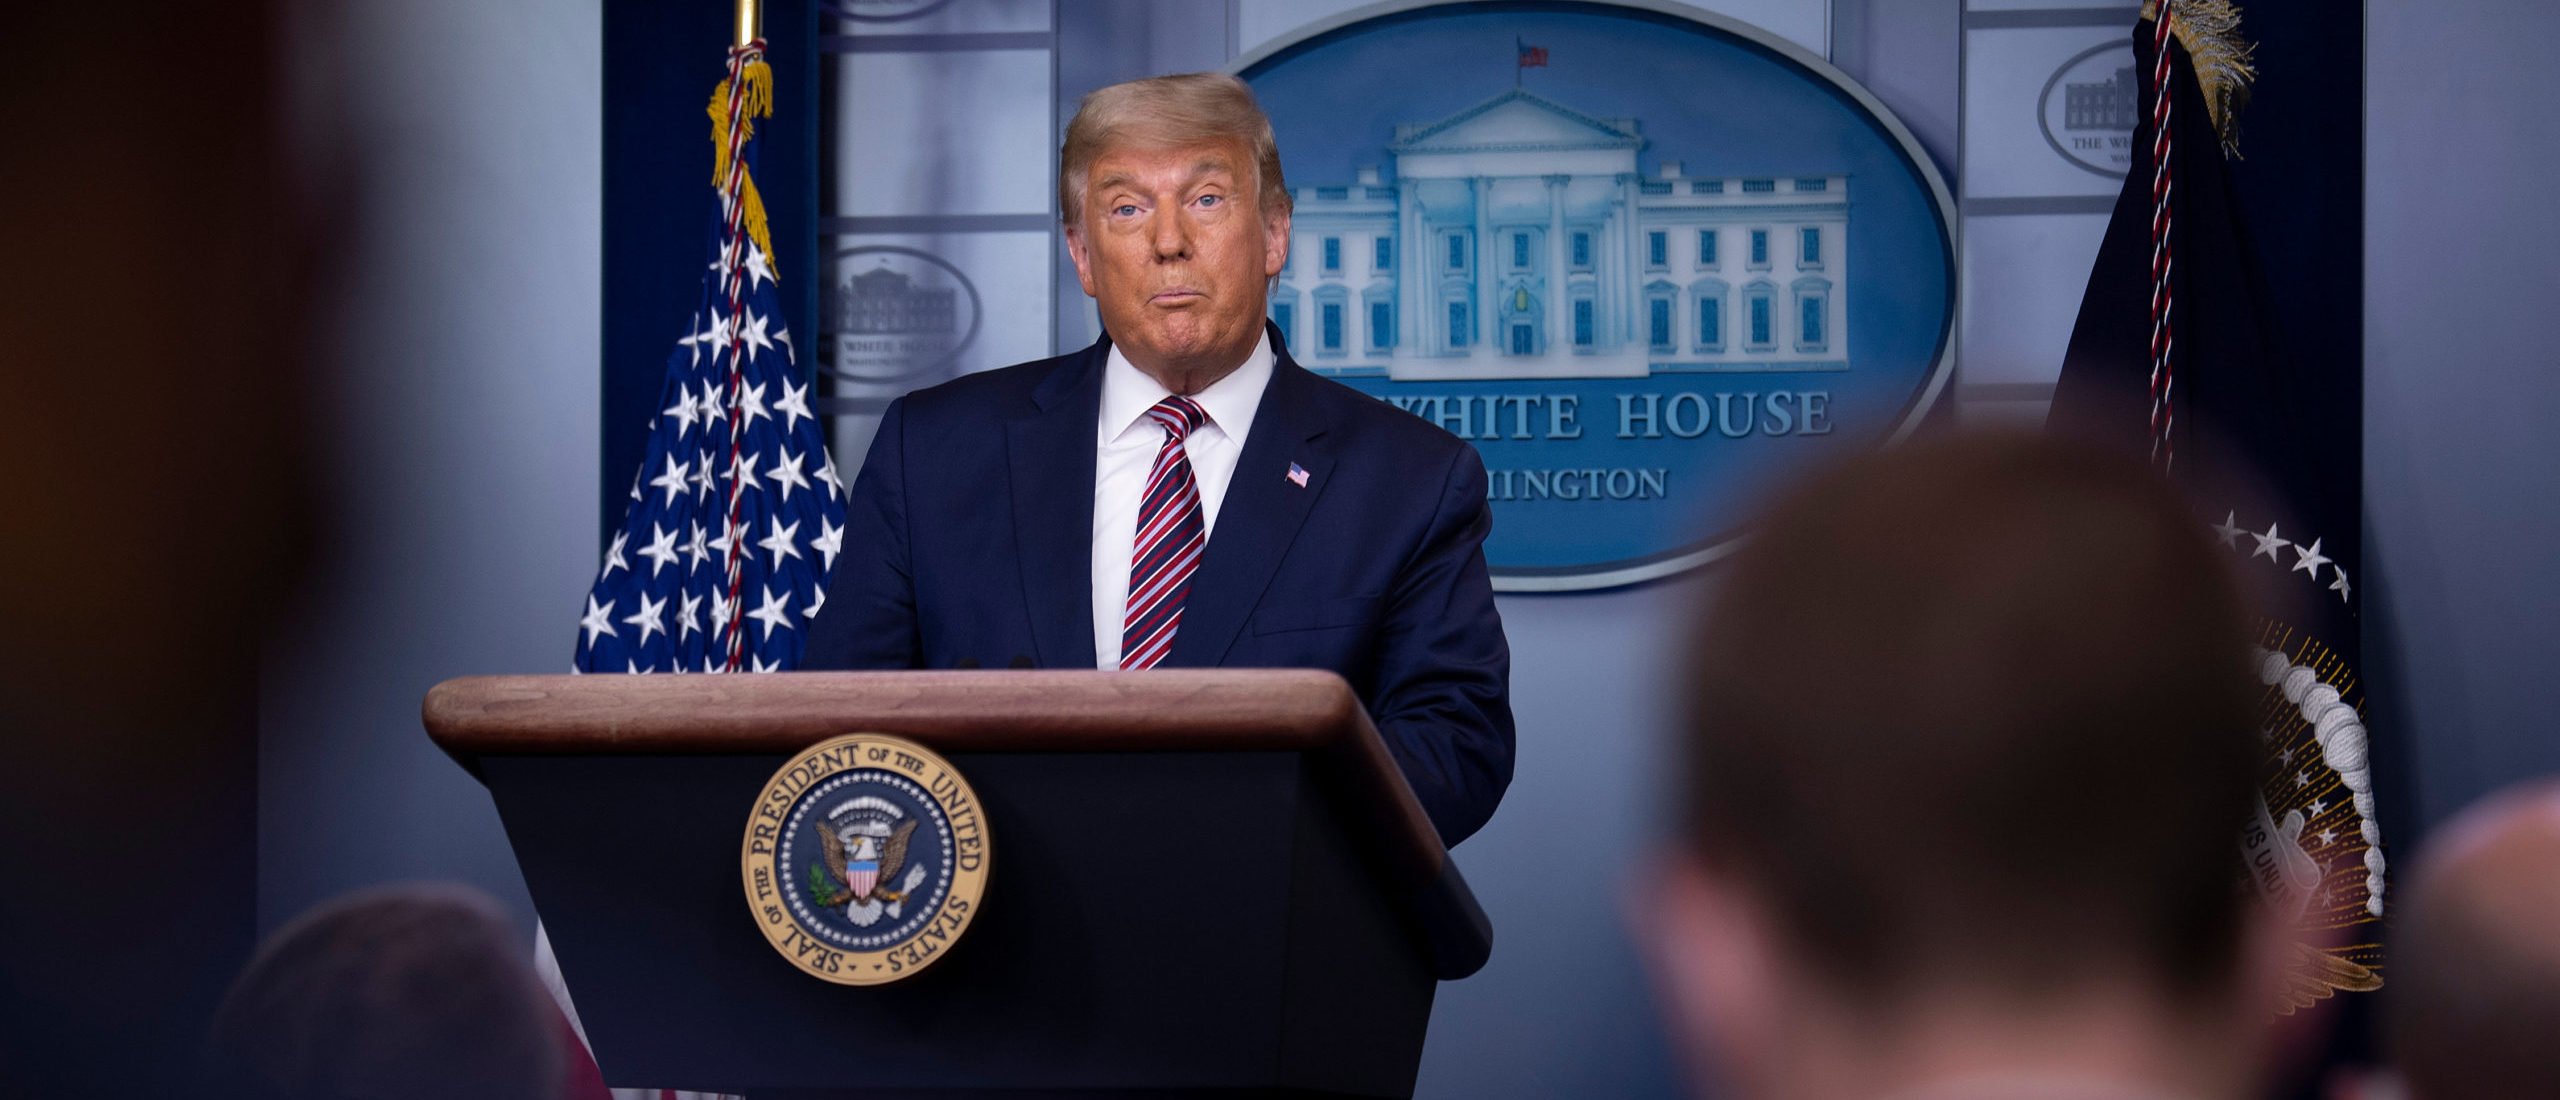 US President Donald Trump speaks in the Brady Briefing Room at the White House in Washington, DC on November 5, 2020. (Photo by BRENDAN SMIALOWSKI/AFP via Getty Images)